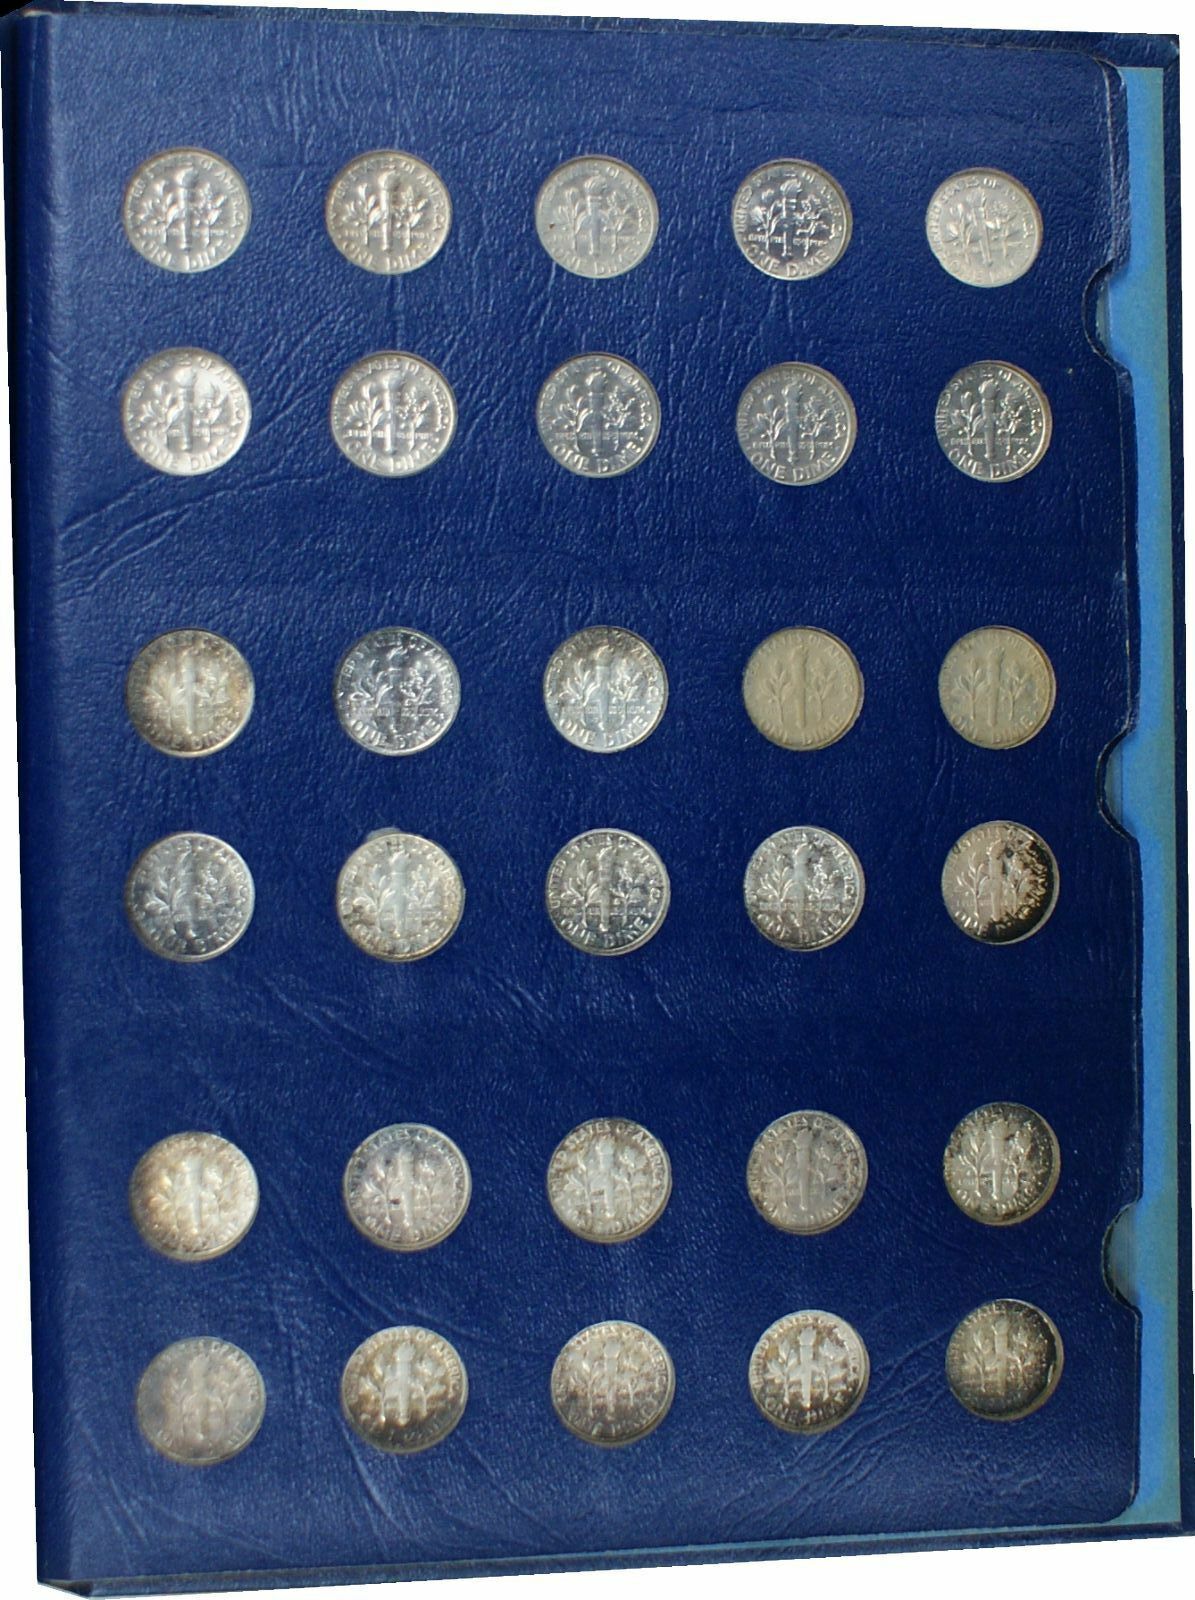 Roosevelt Dime 65-70 n. Chr. 1946 to Roughly 65-70 Circulated Coin Set ...